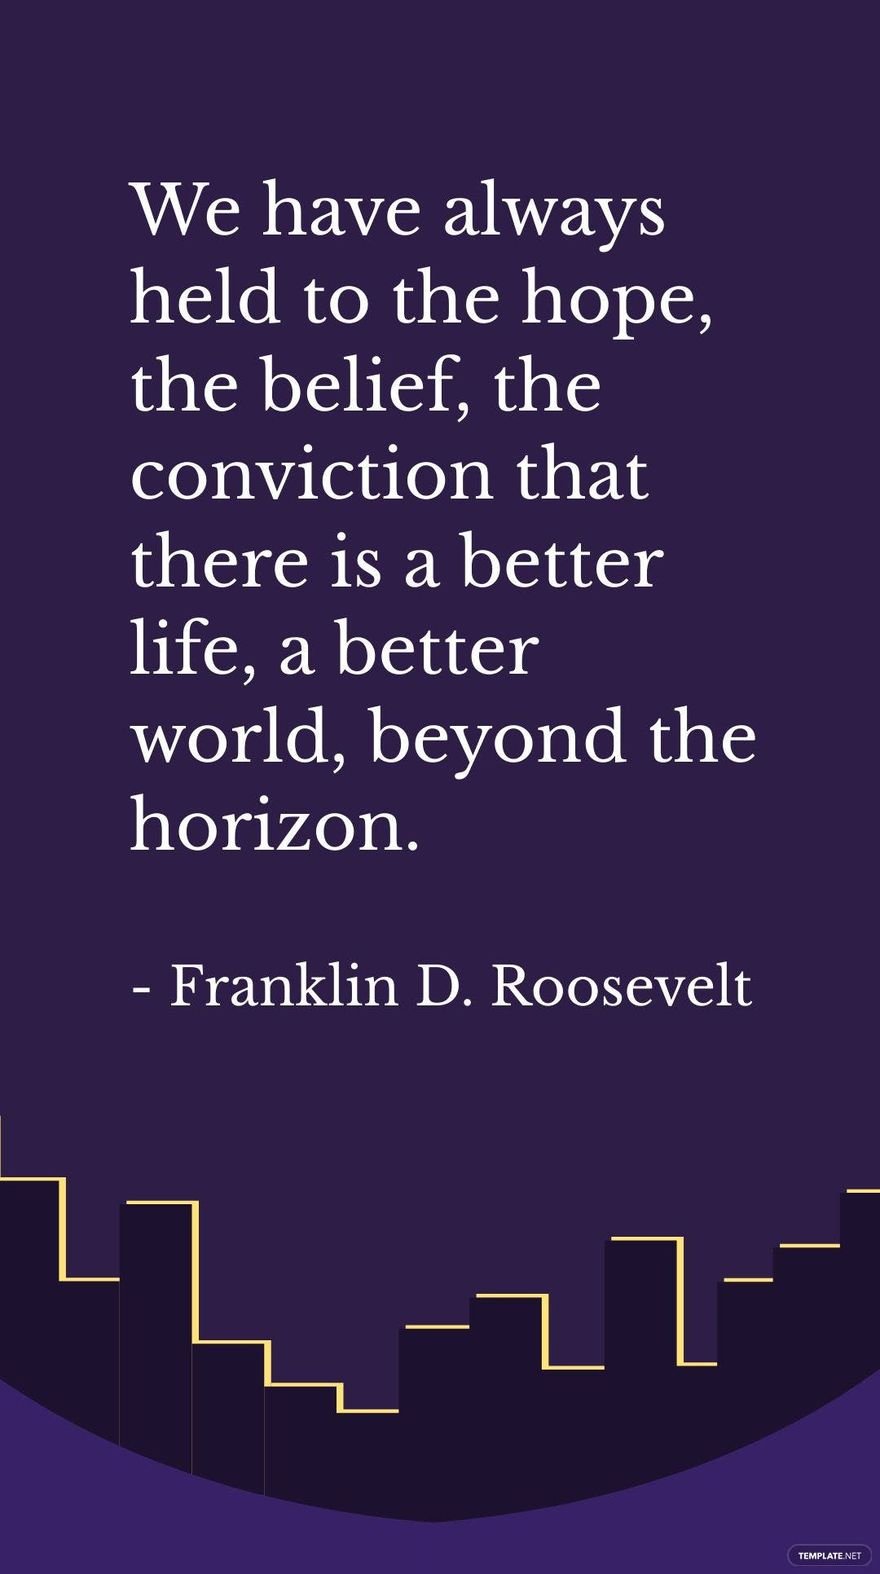 Free Franklin D. Roosevelt - We have always held to the hope, the belief, the conviction that there is a better life, a better world, beyond the horizon. in JPG